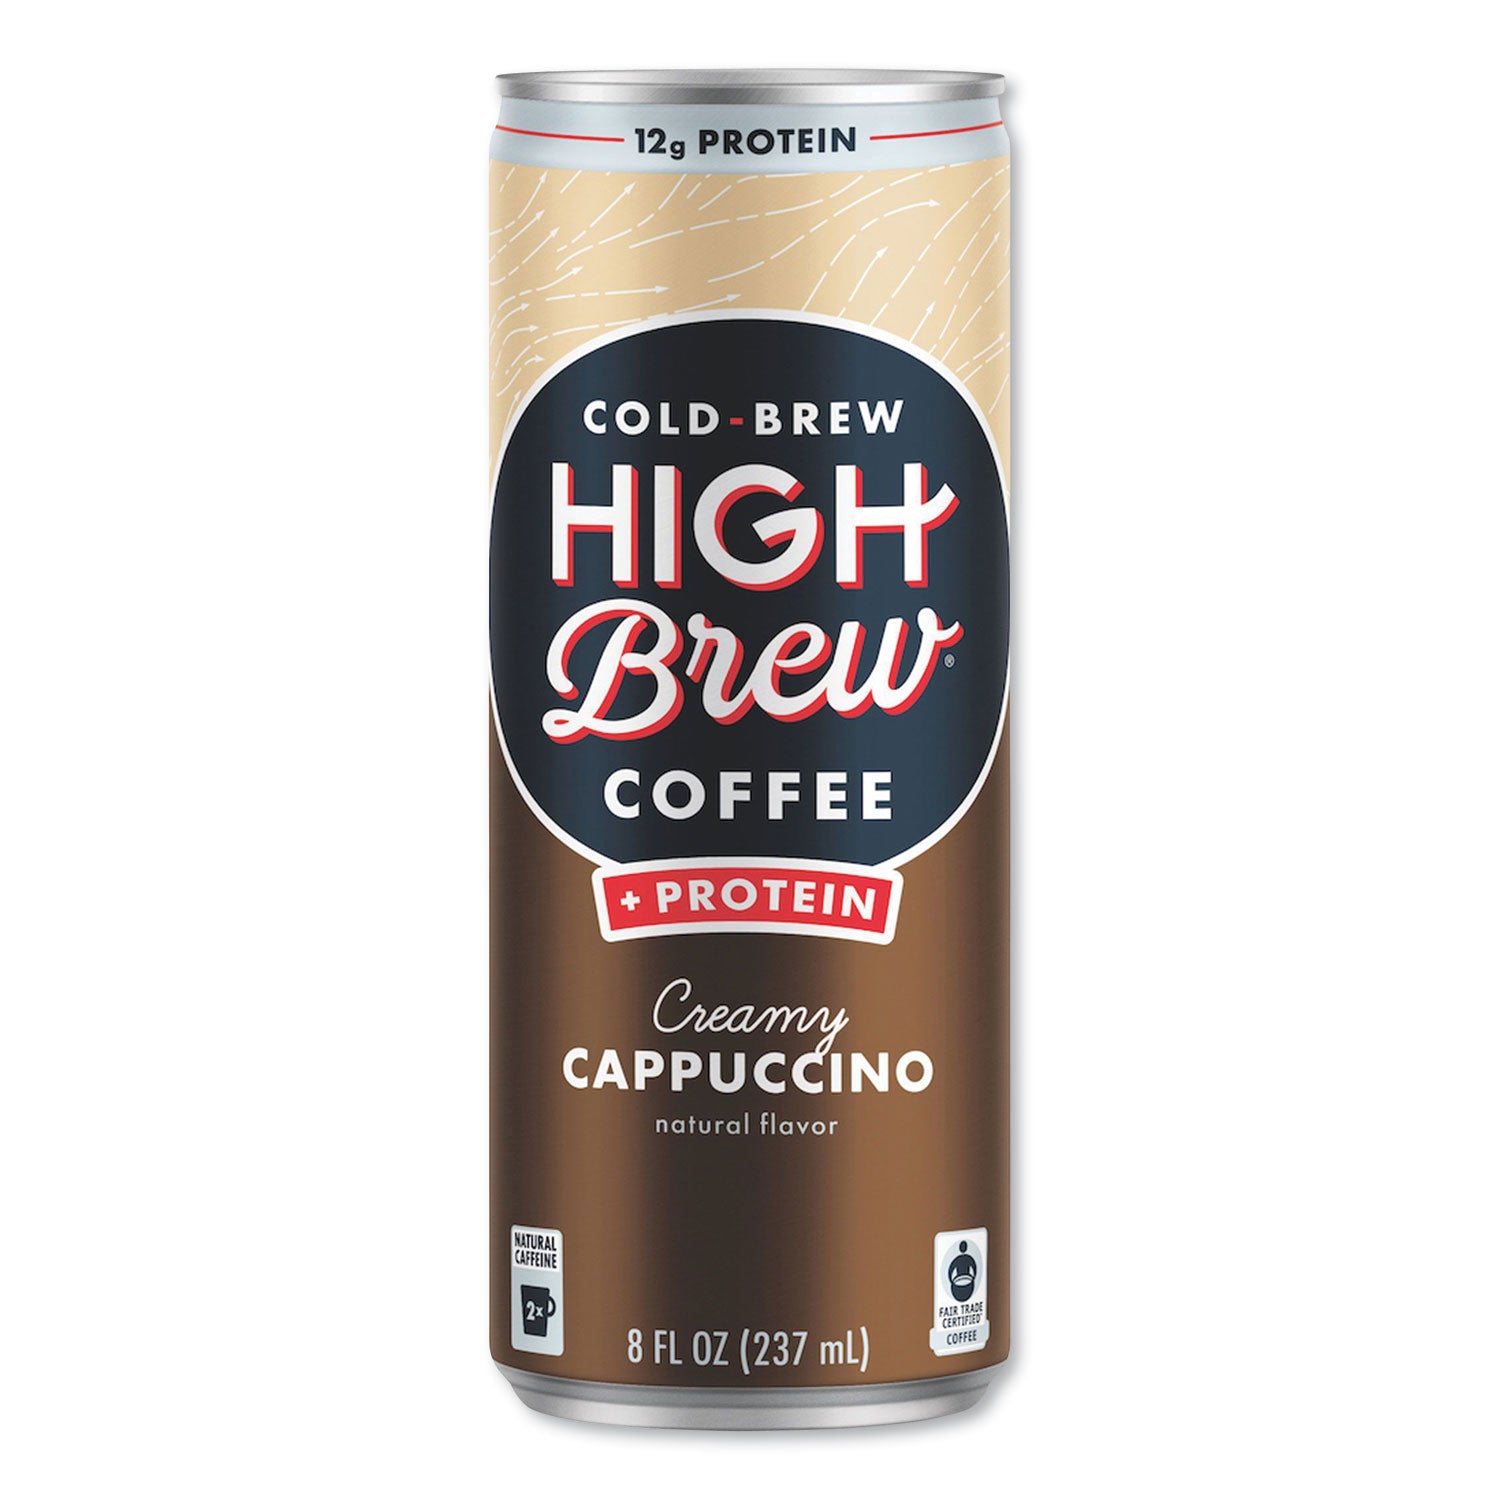 cold-brew-coffee-+-protein-creamy-cappuccino-8-oz-can-12-pack_hih00560 - 2